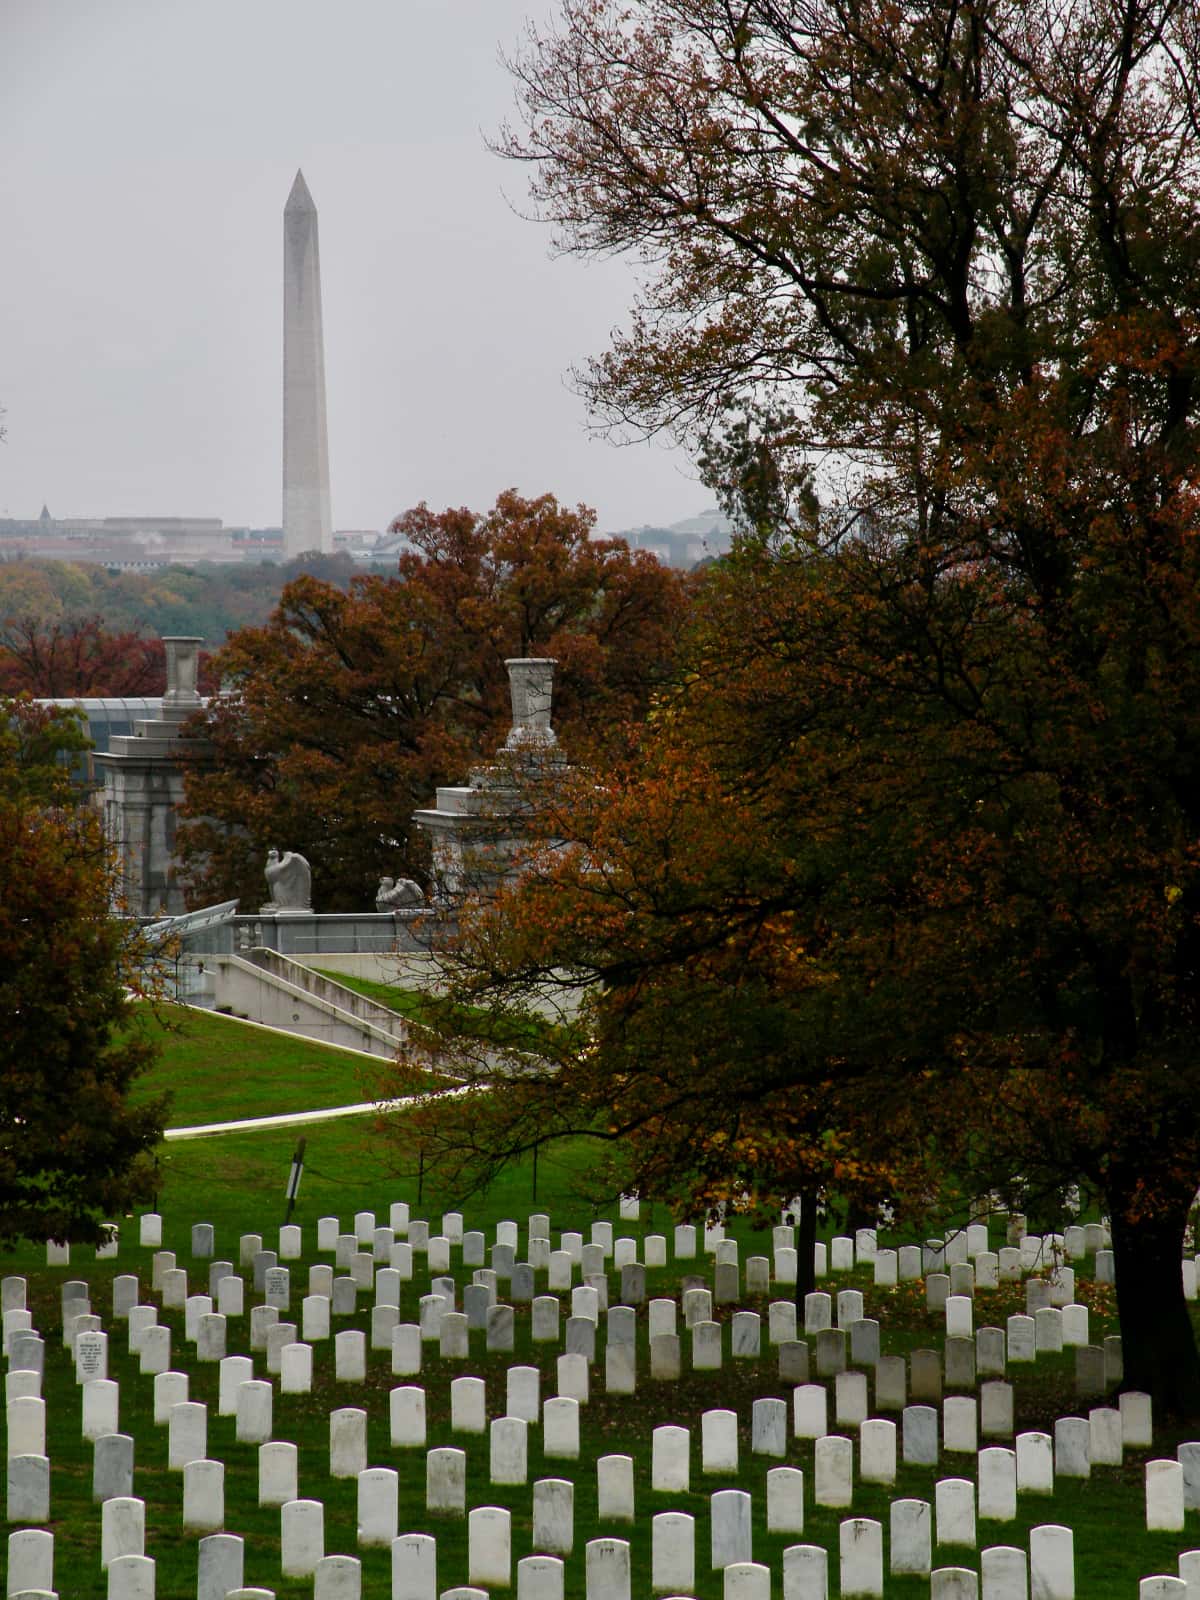 Cemetery in foreground with Washington monument in background